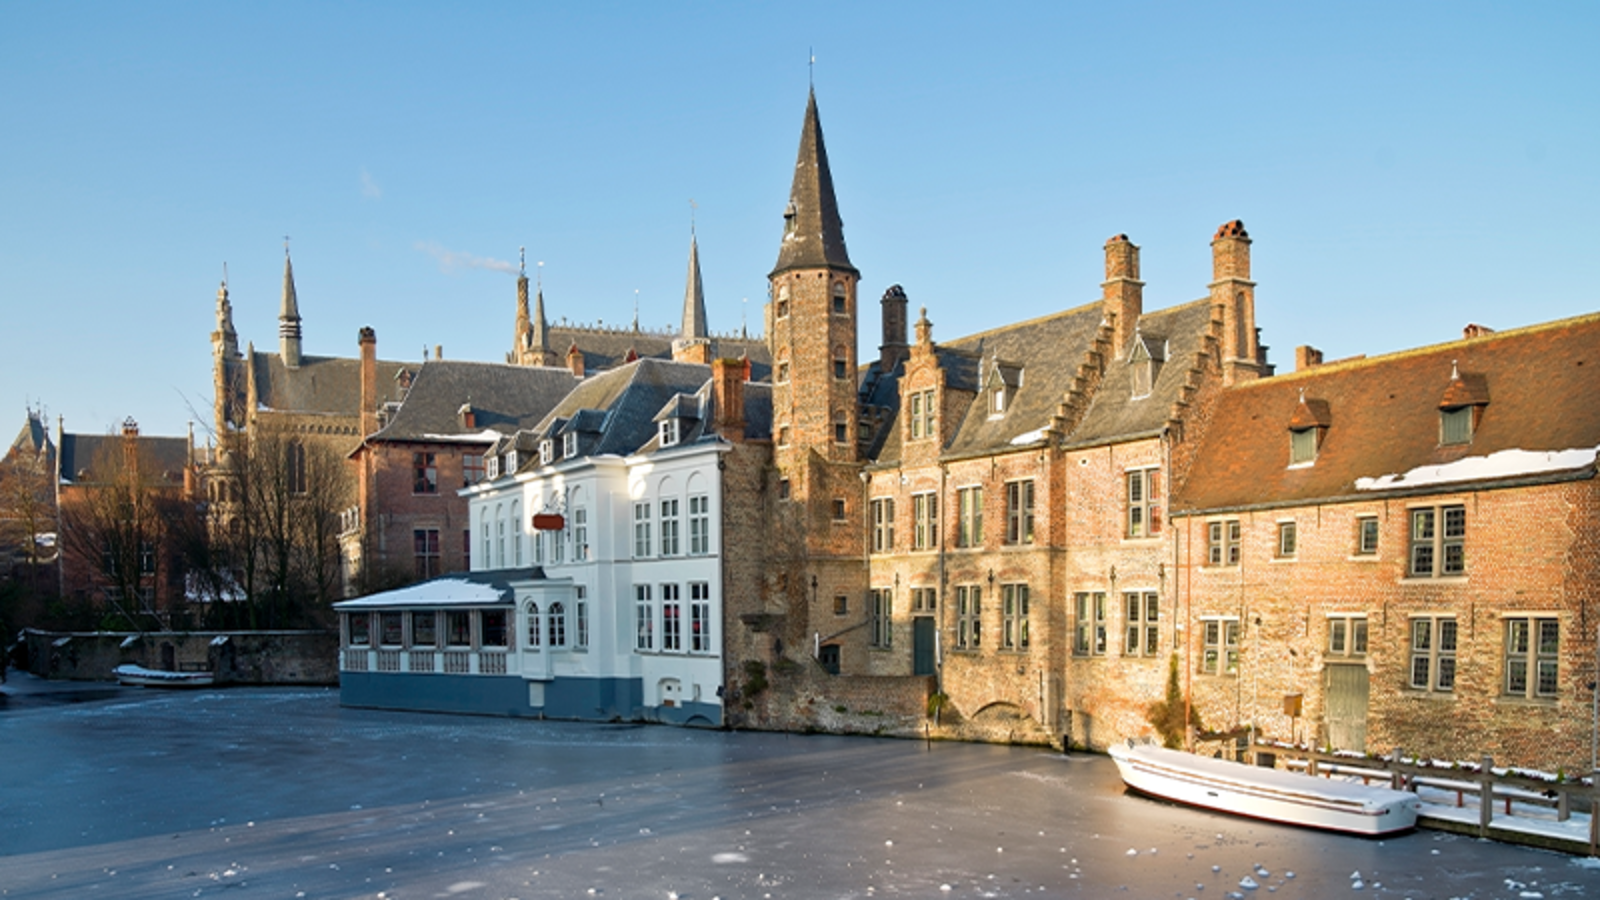 City of Bruges on a cold yet sunny day